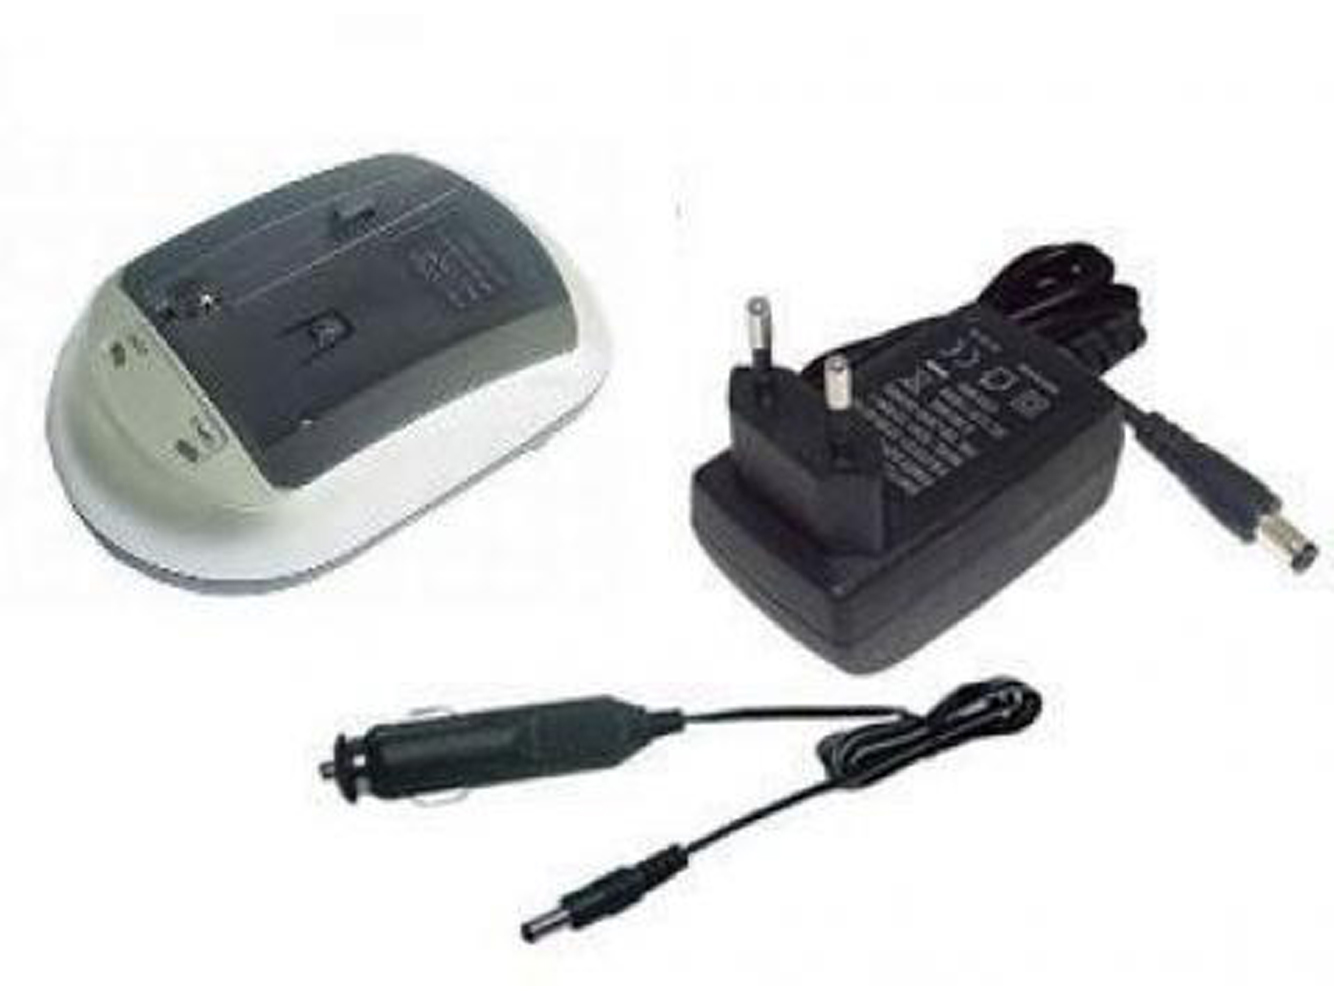 Canon Bp-911, Bp-914 Battery Chargers For Dm-mv1, Dm-mv10 replacement